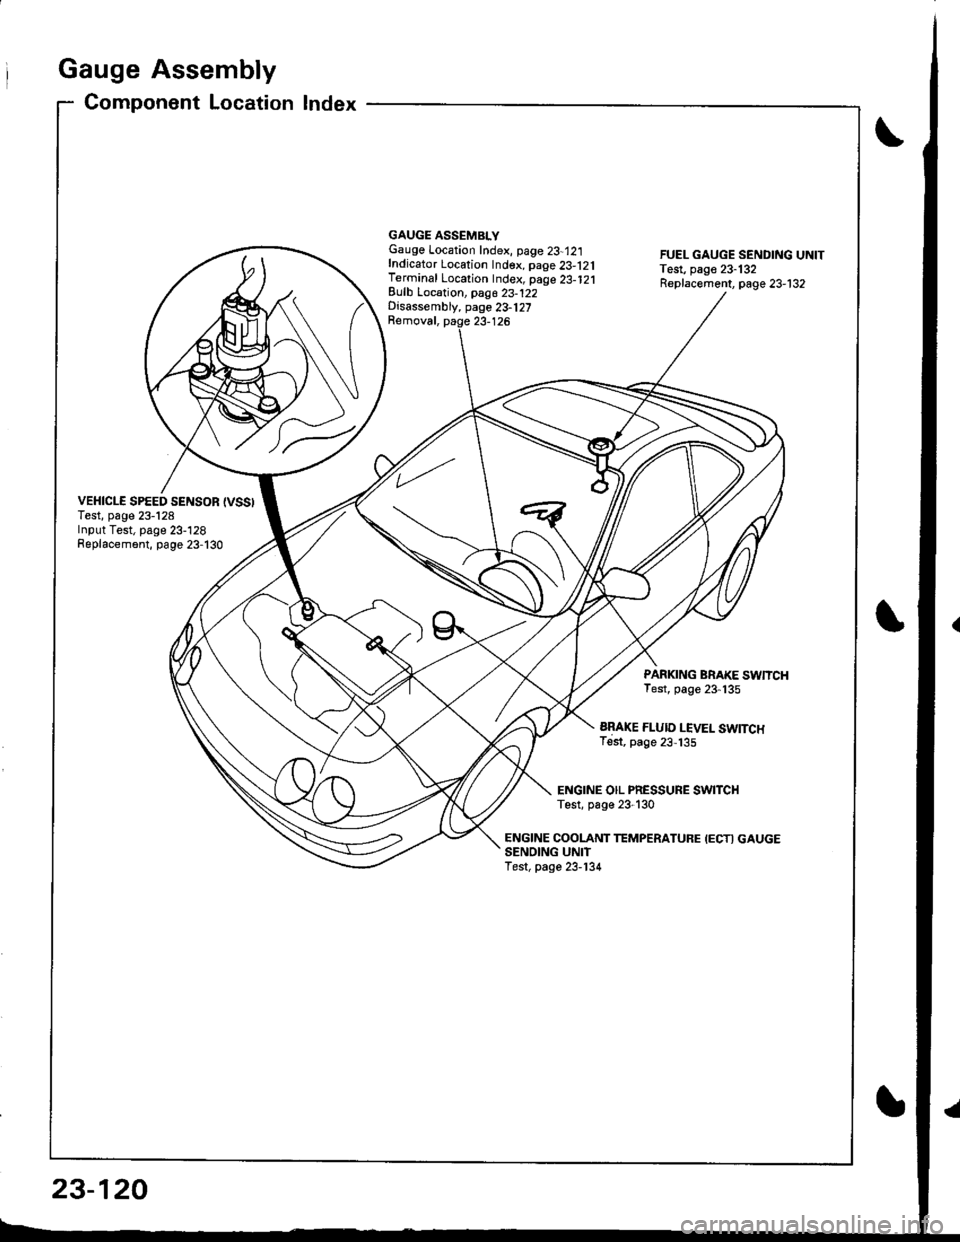 HONDA INTEGRA 1998 4.G Workshop Manual Gauge Assembly
Component Location Index
VEHICLE SPEED SENSOR {VSSITest, page 23-128Input Test, page 23-128Replacement, page 23-130
GAUGE ASSEMBLYGauge Location Index, page 23-12:|fndicator Location In